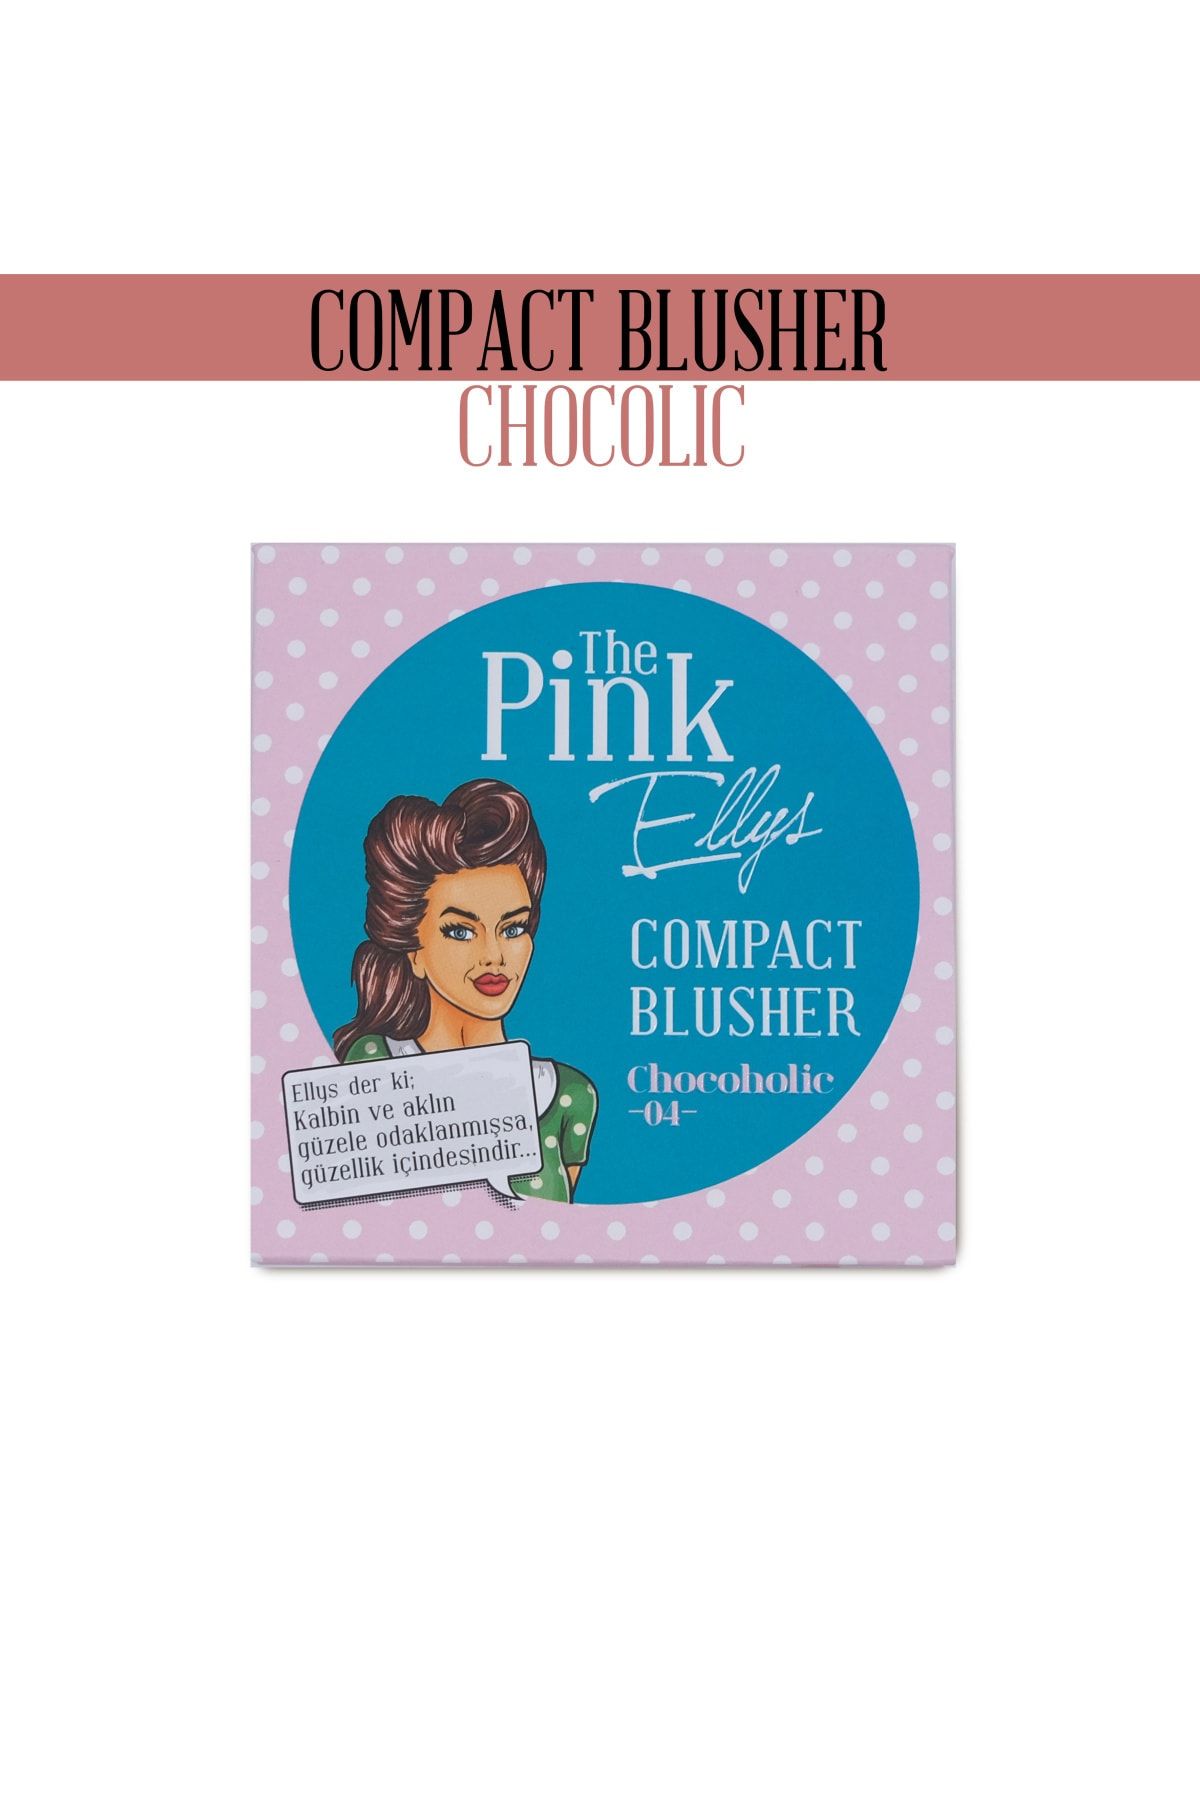 The Pink Ellys Compact Blusher Chocoholic